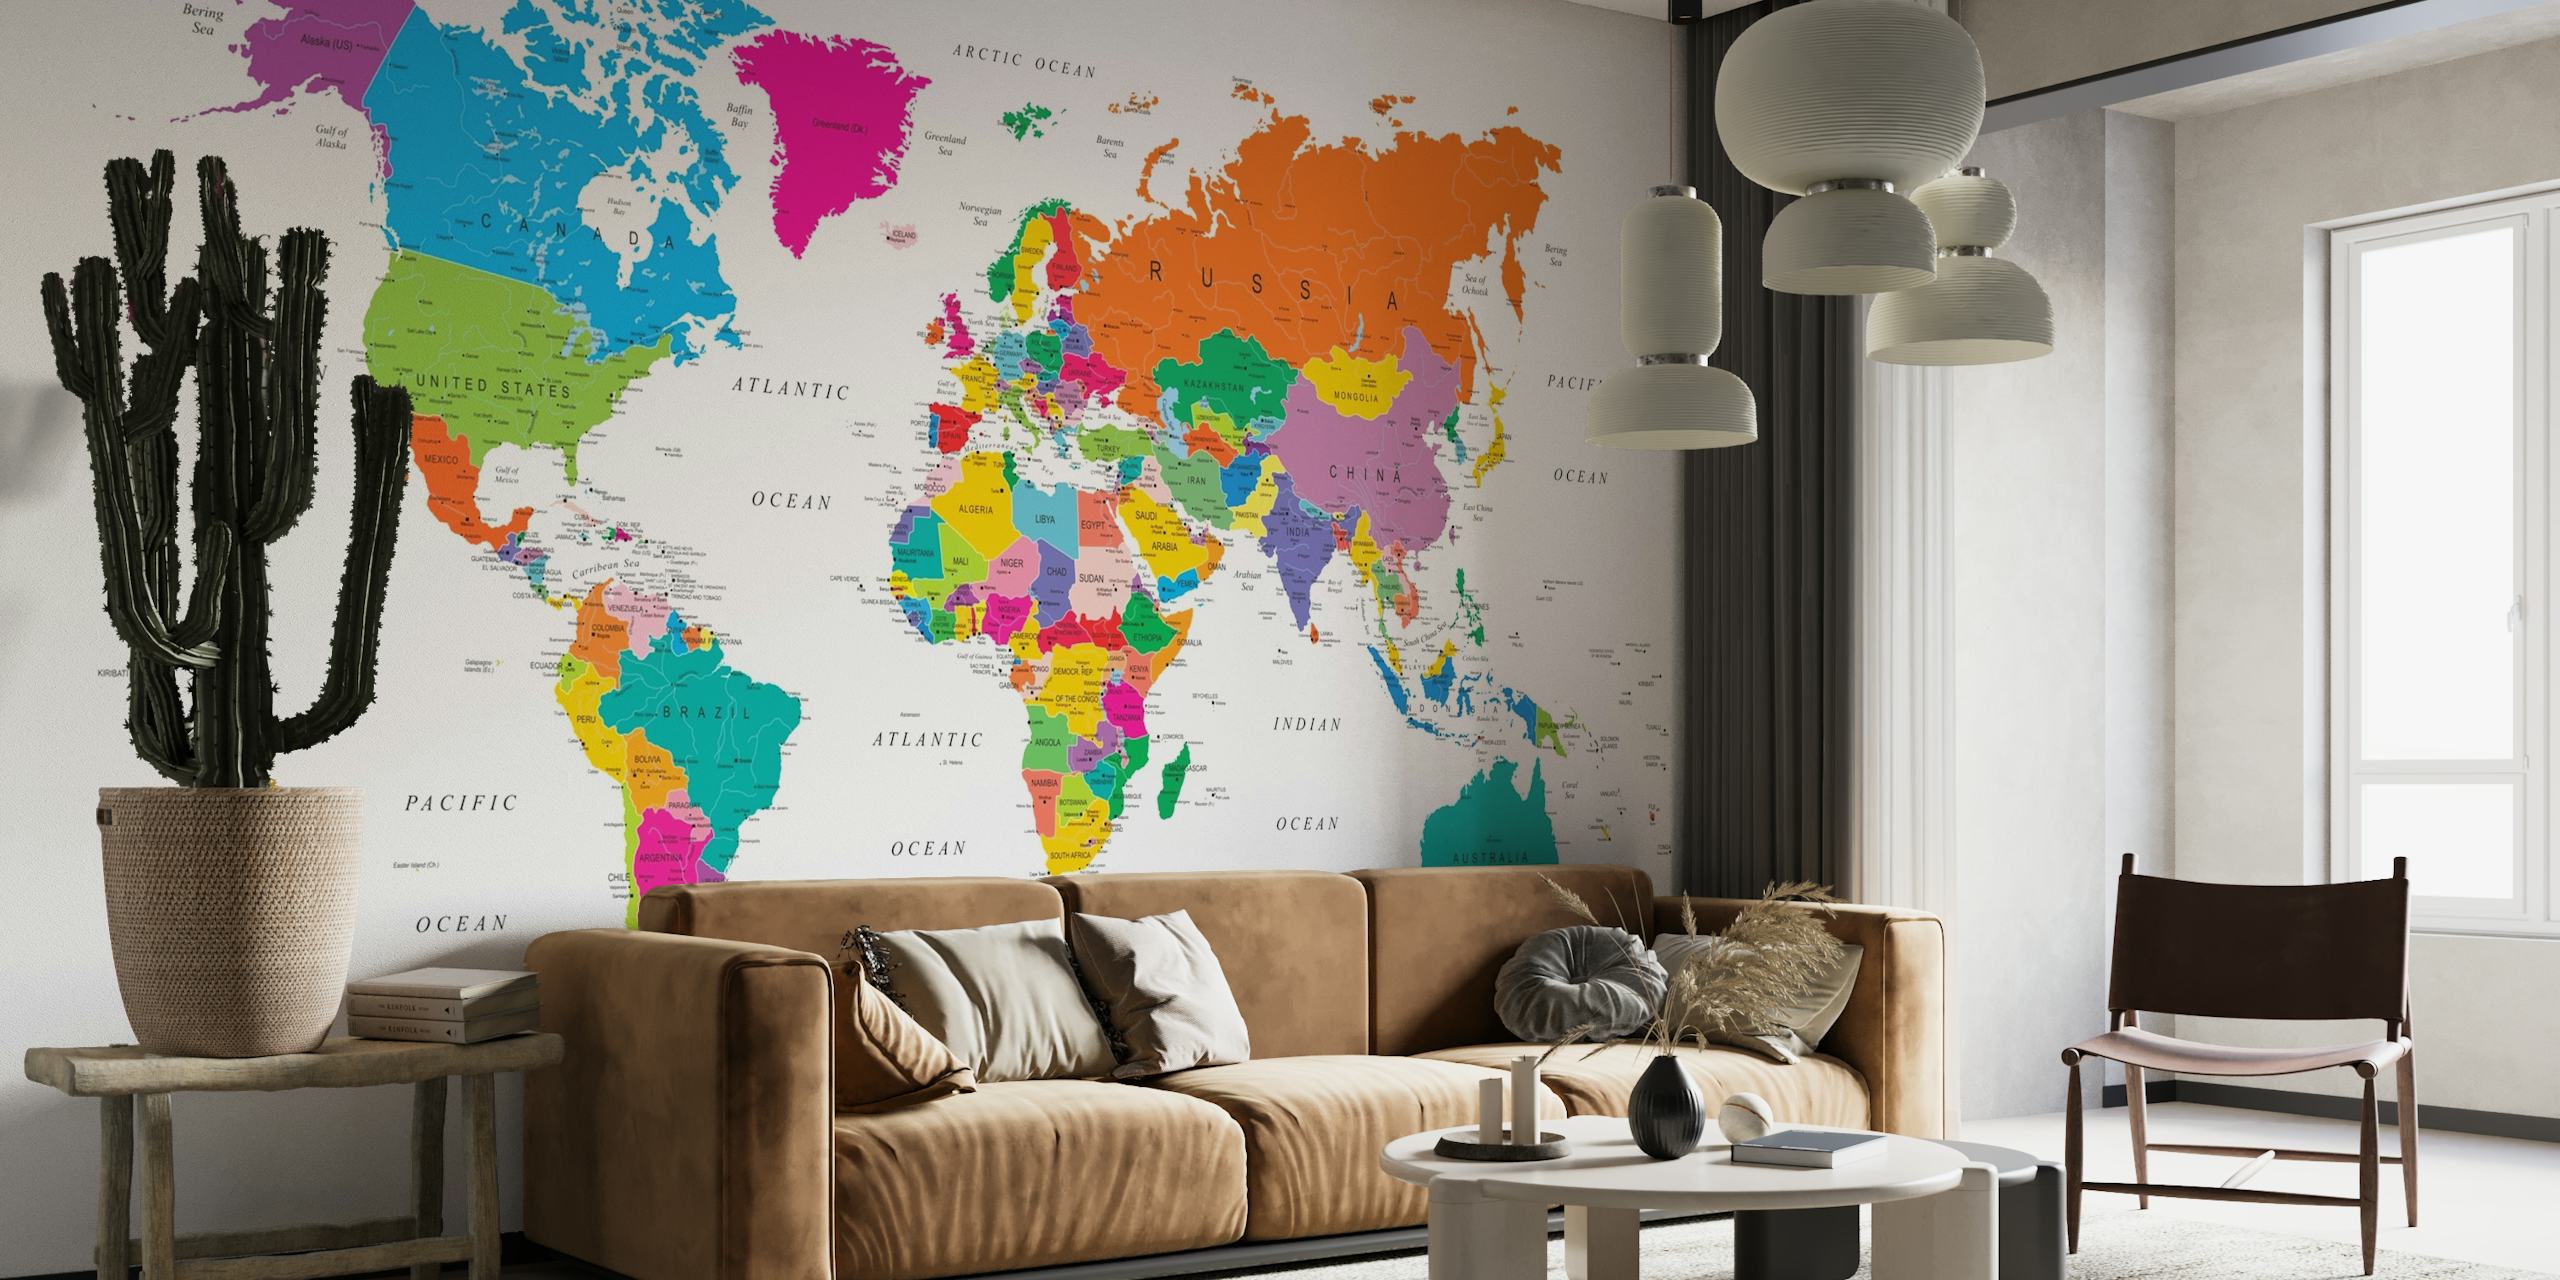 Vibrant colored world map wallpaper for classrooms and kids' rooms